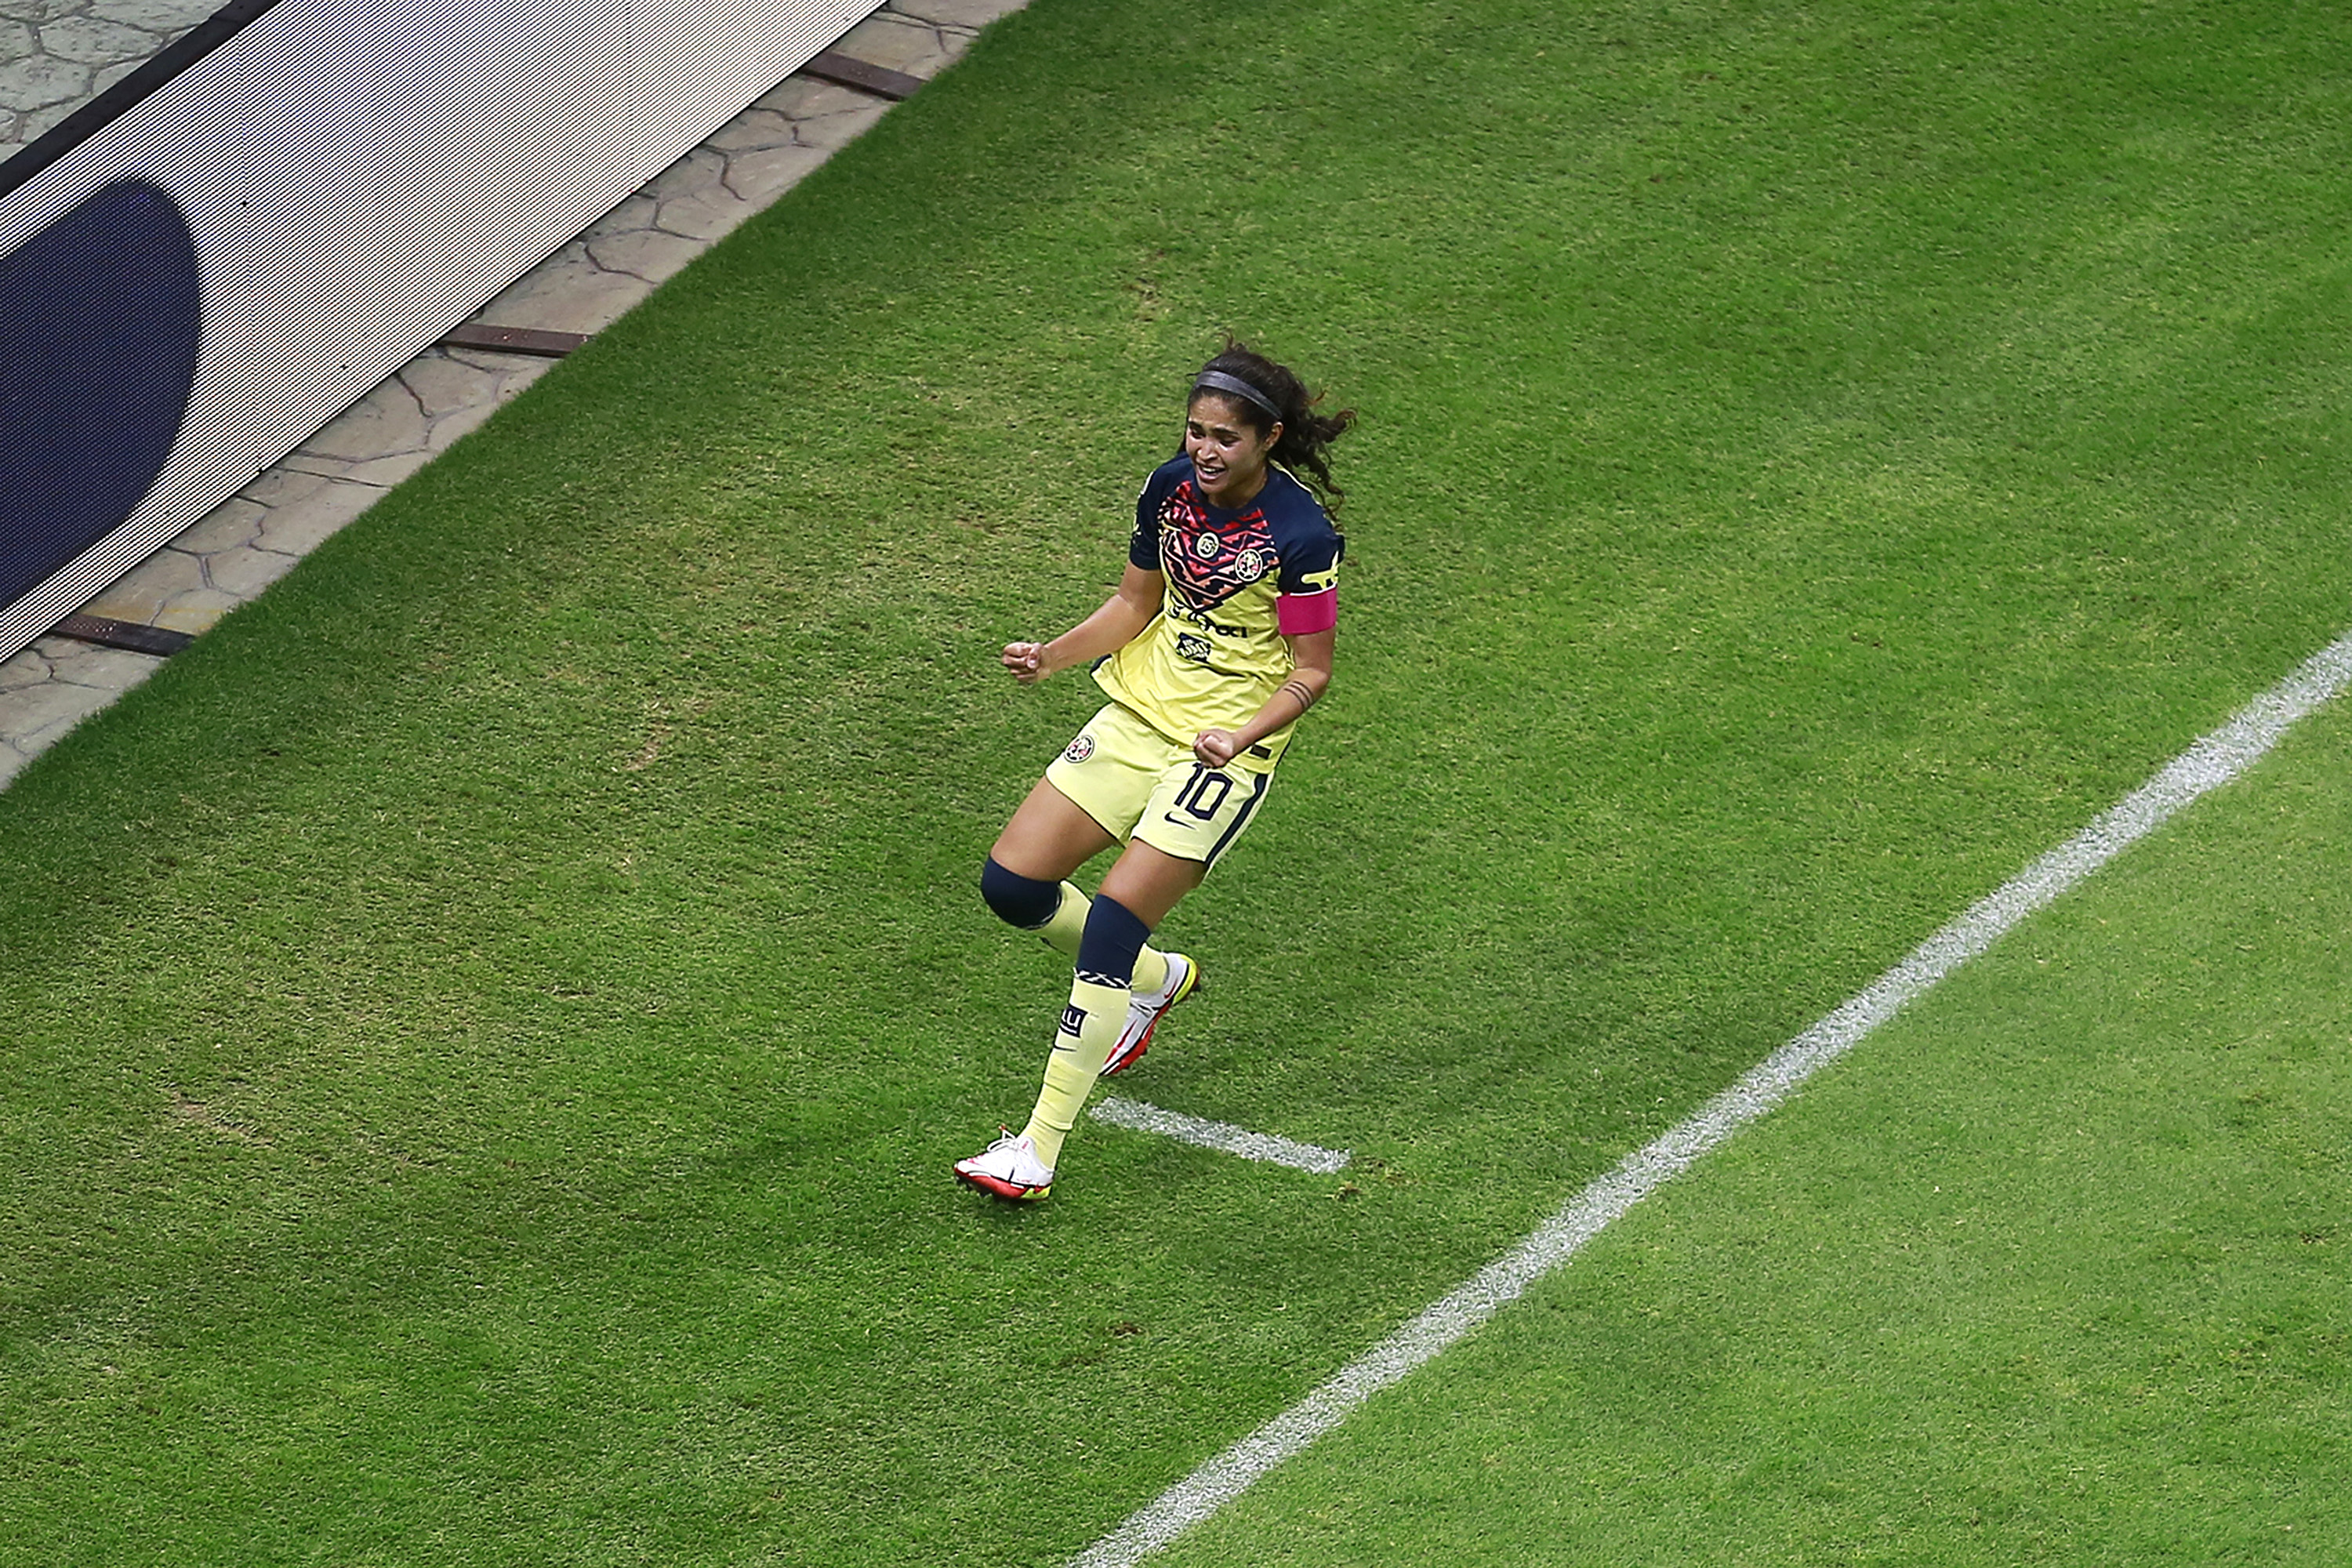 Daniela Espinosa of America celebrates after scoring the second goal of her team during a match between America and Cruz Azul as part of the Torneo Grita Mexico A21 Liga MX Femenil at Estadio Azteca on October 4, 2021 in Mexico City, Mexico.